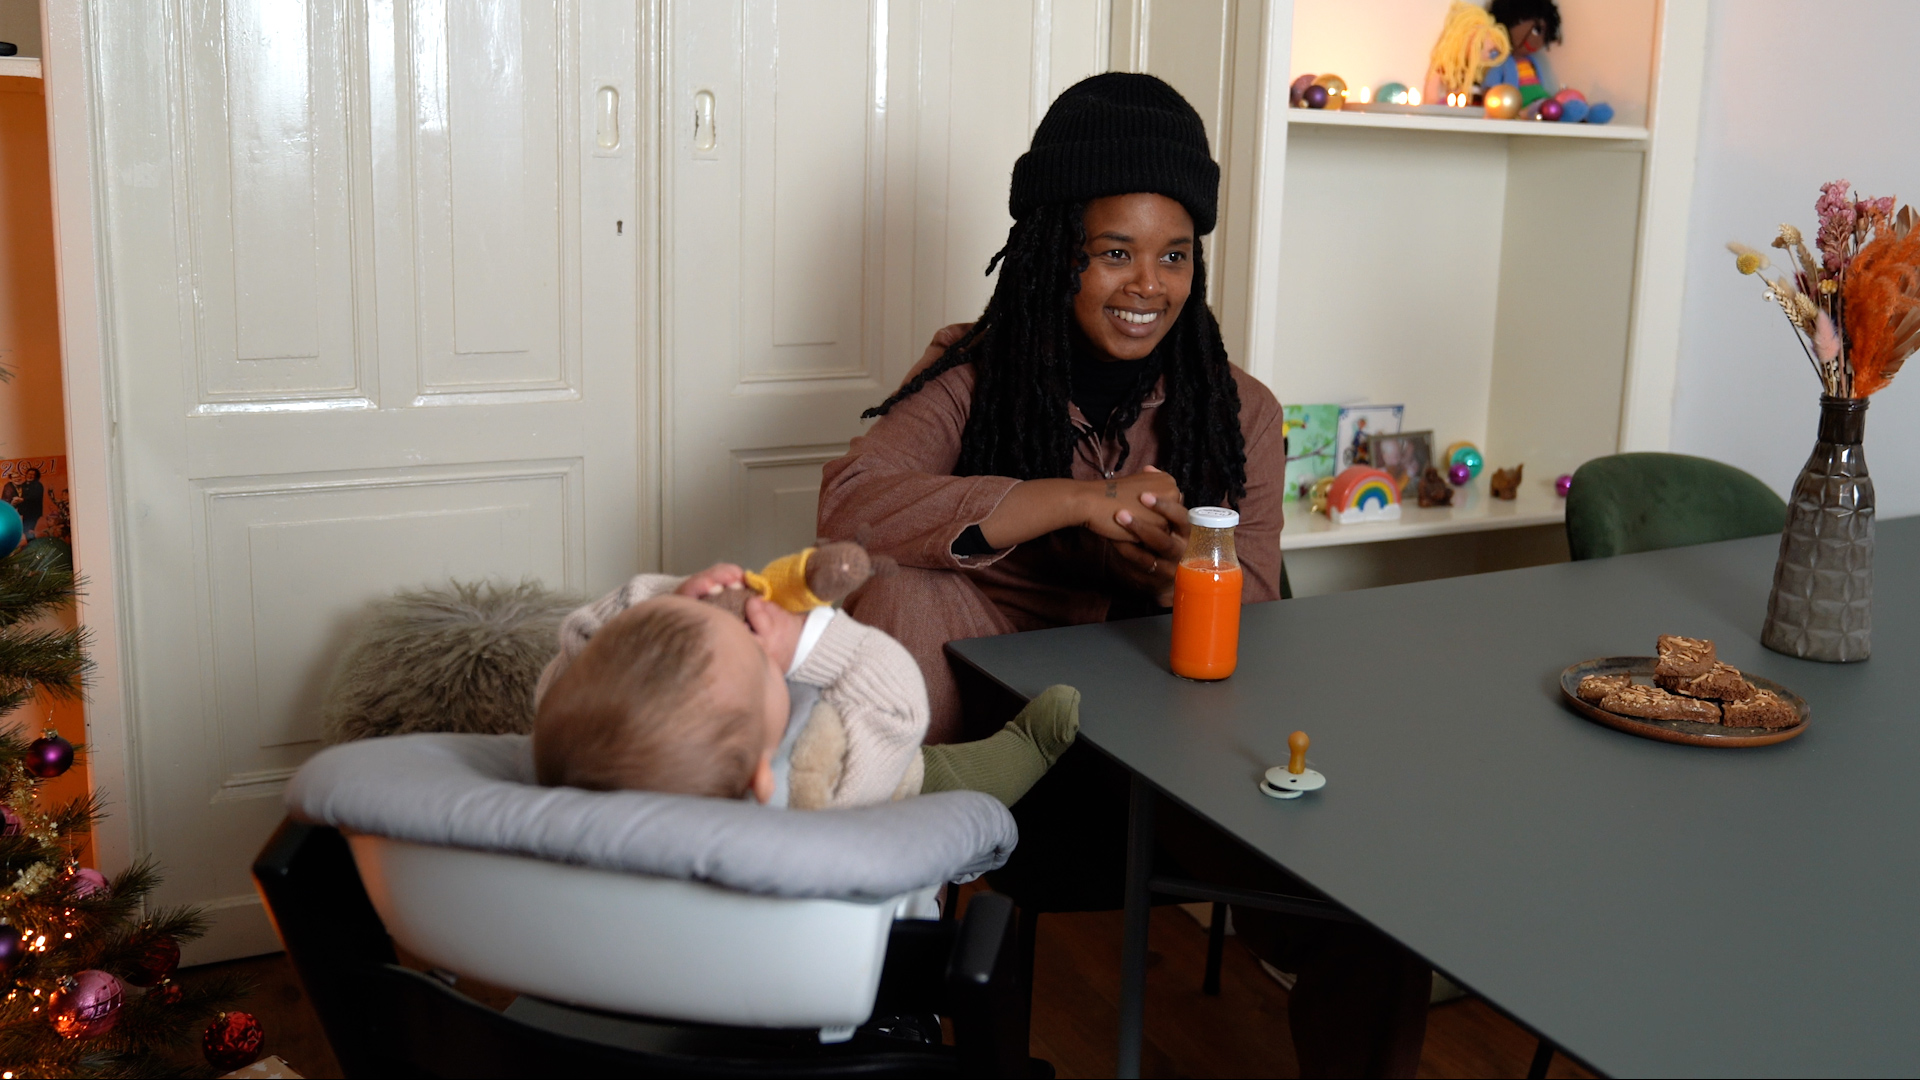 &C x Stokke: Hellup, baby in the house